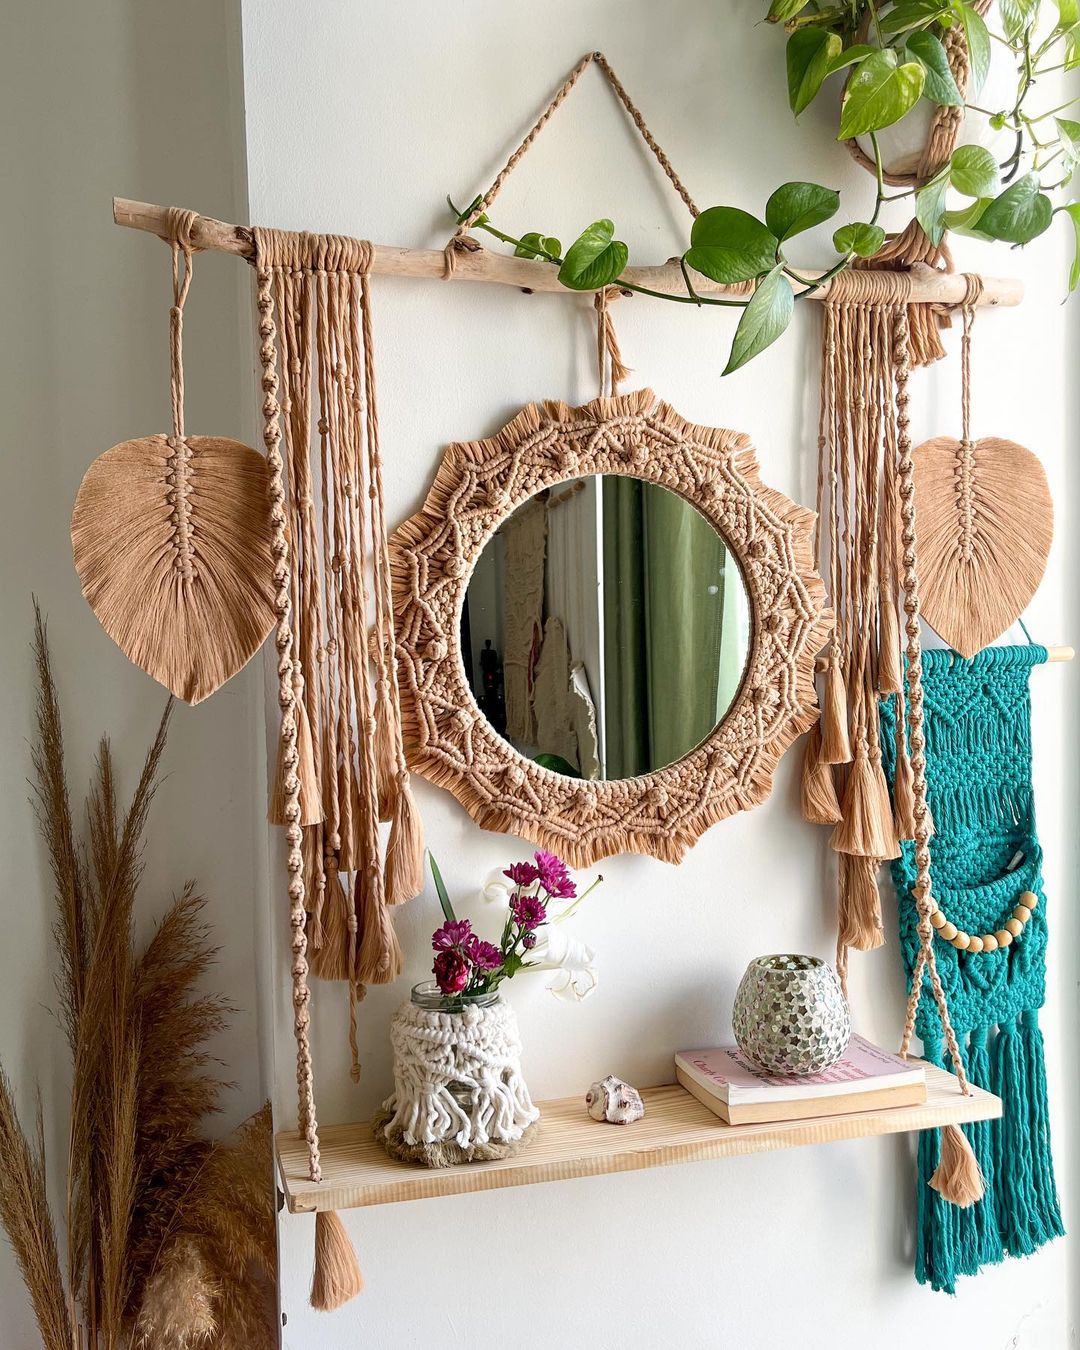 styling your macrame wall hanging does not have to be difficult, a mirror, shelf with personal items, and some green leaves can work wonders in achieving your favorite bohemian look